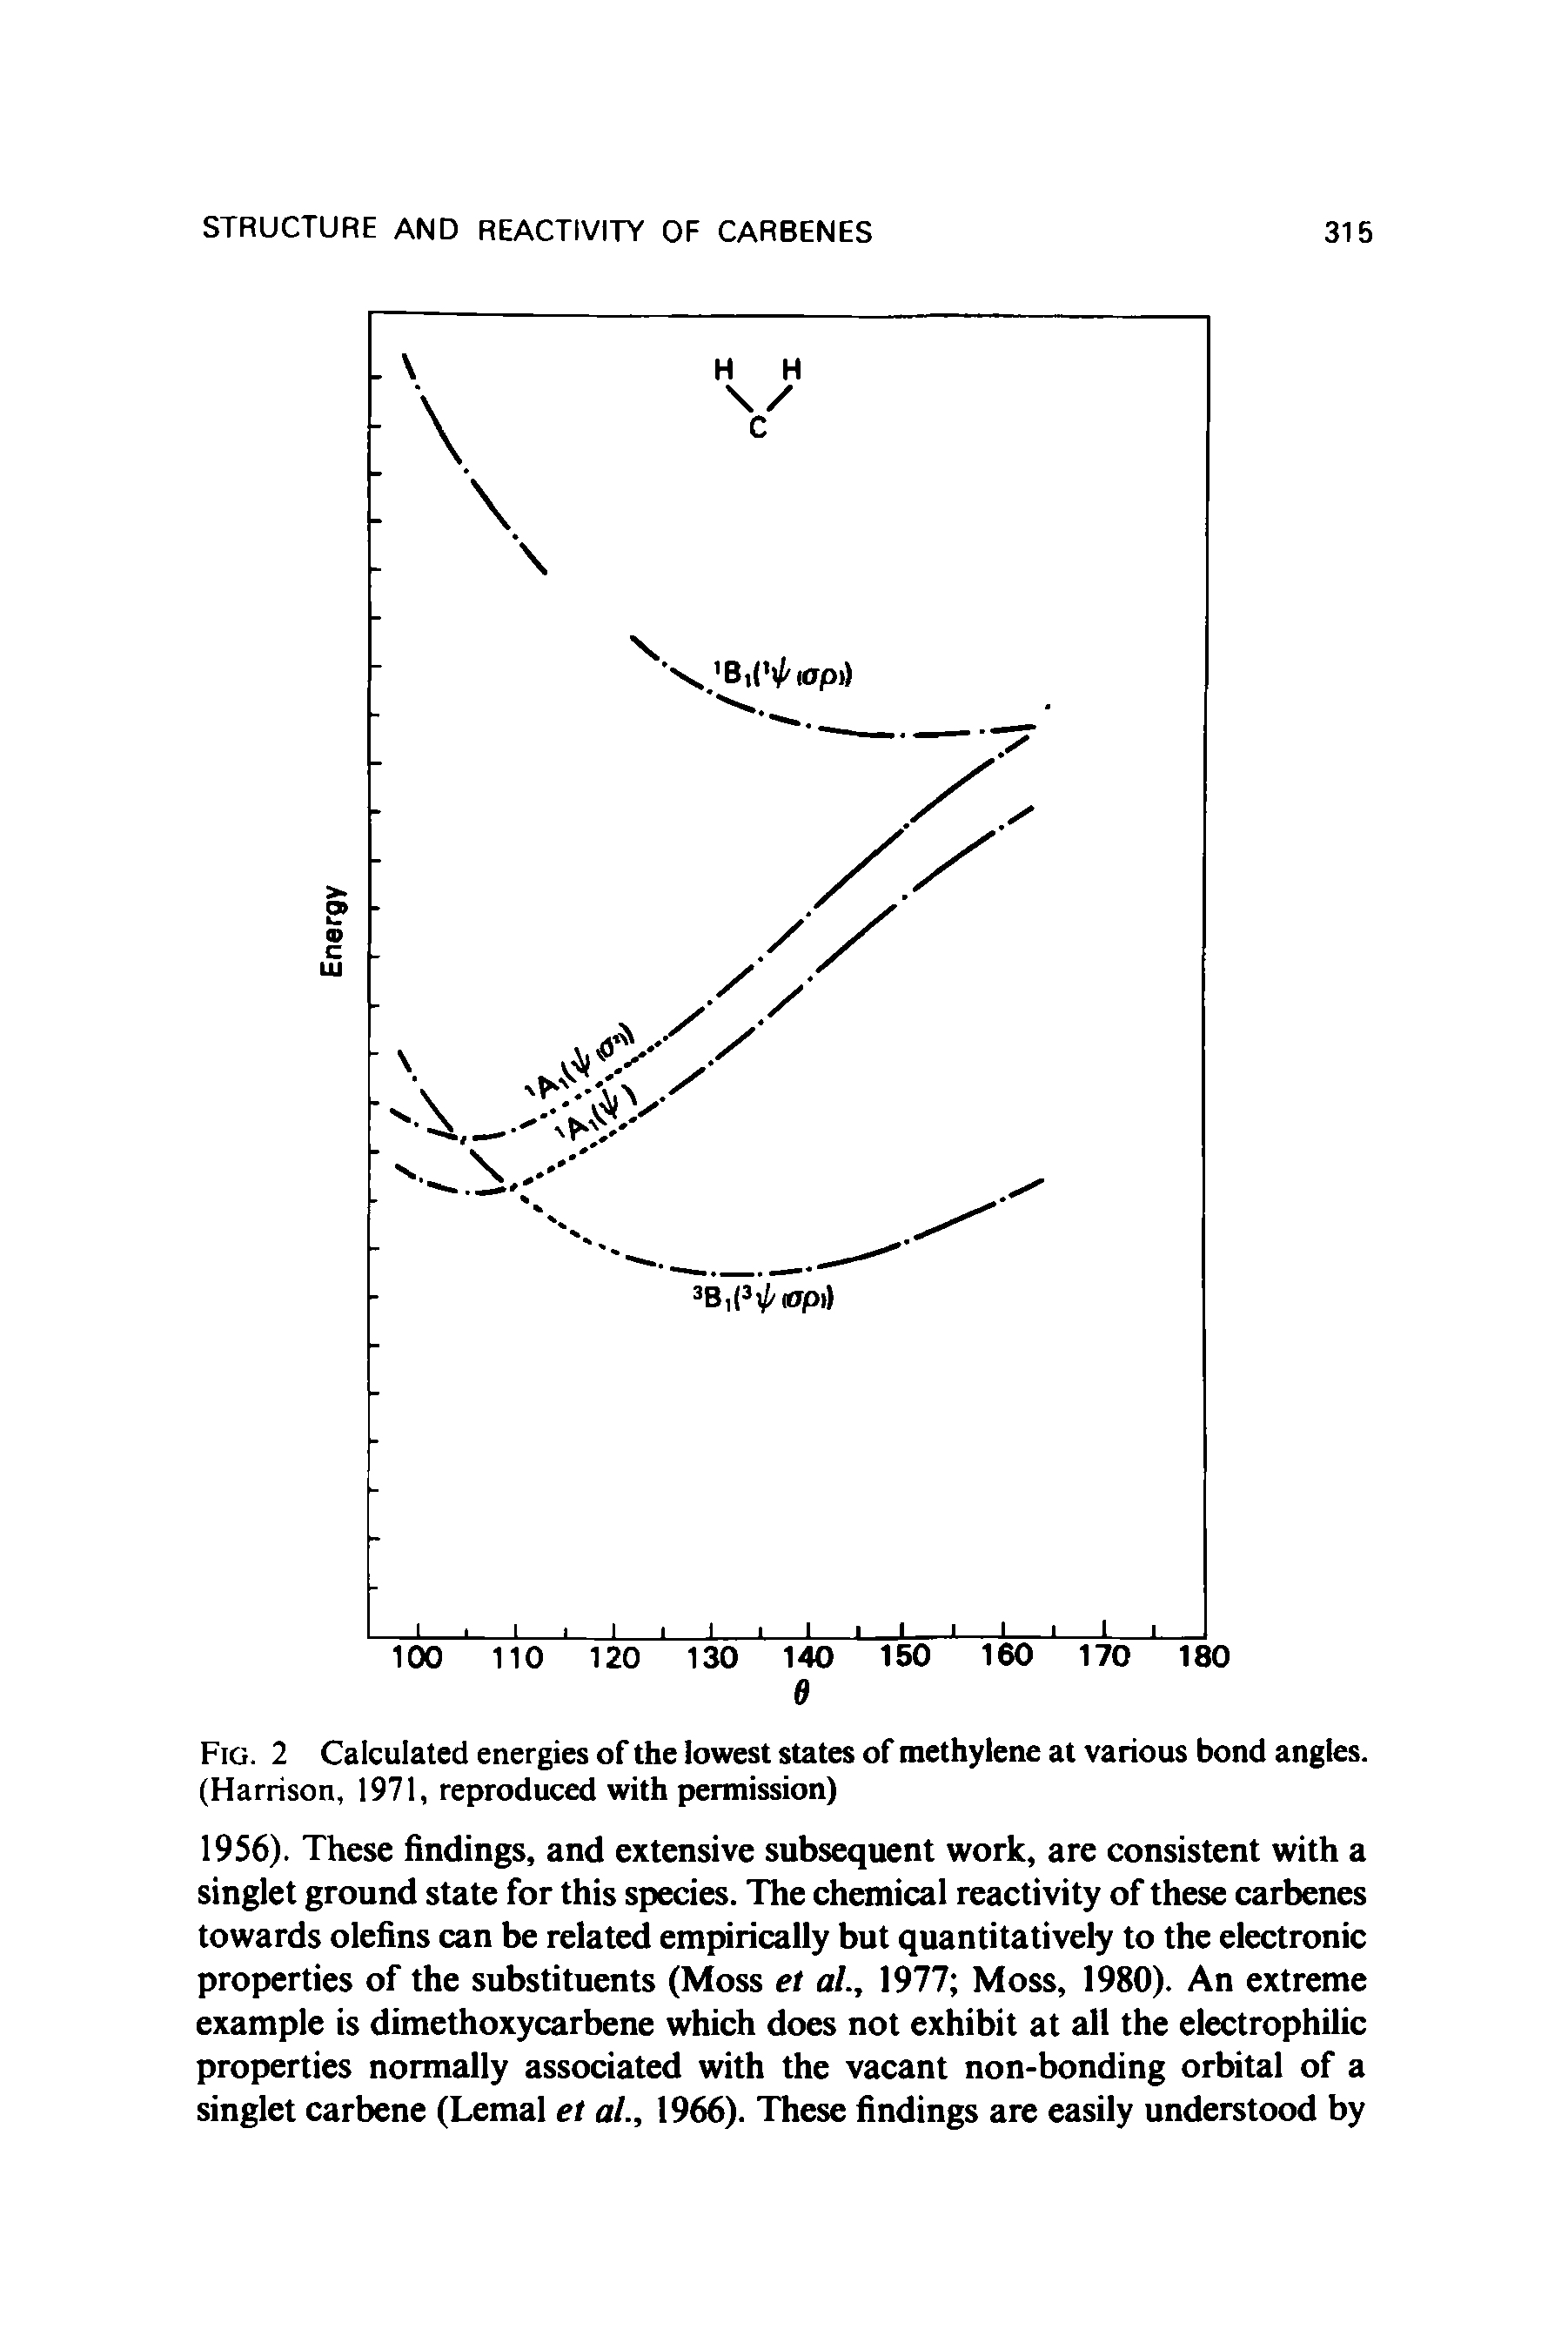 Fig. 2 Calculated energies of the lowest states of methylene at various bond angles. (Harrison, 1971, reproduced with permission)...